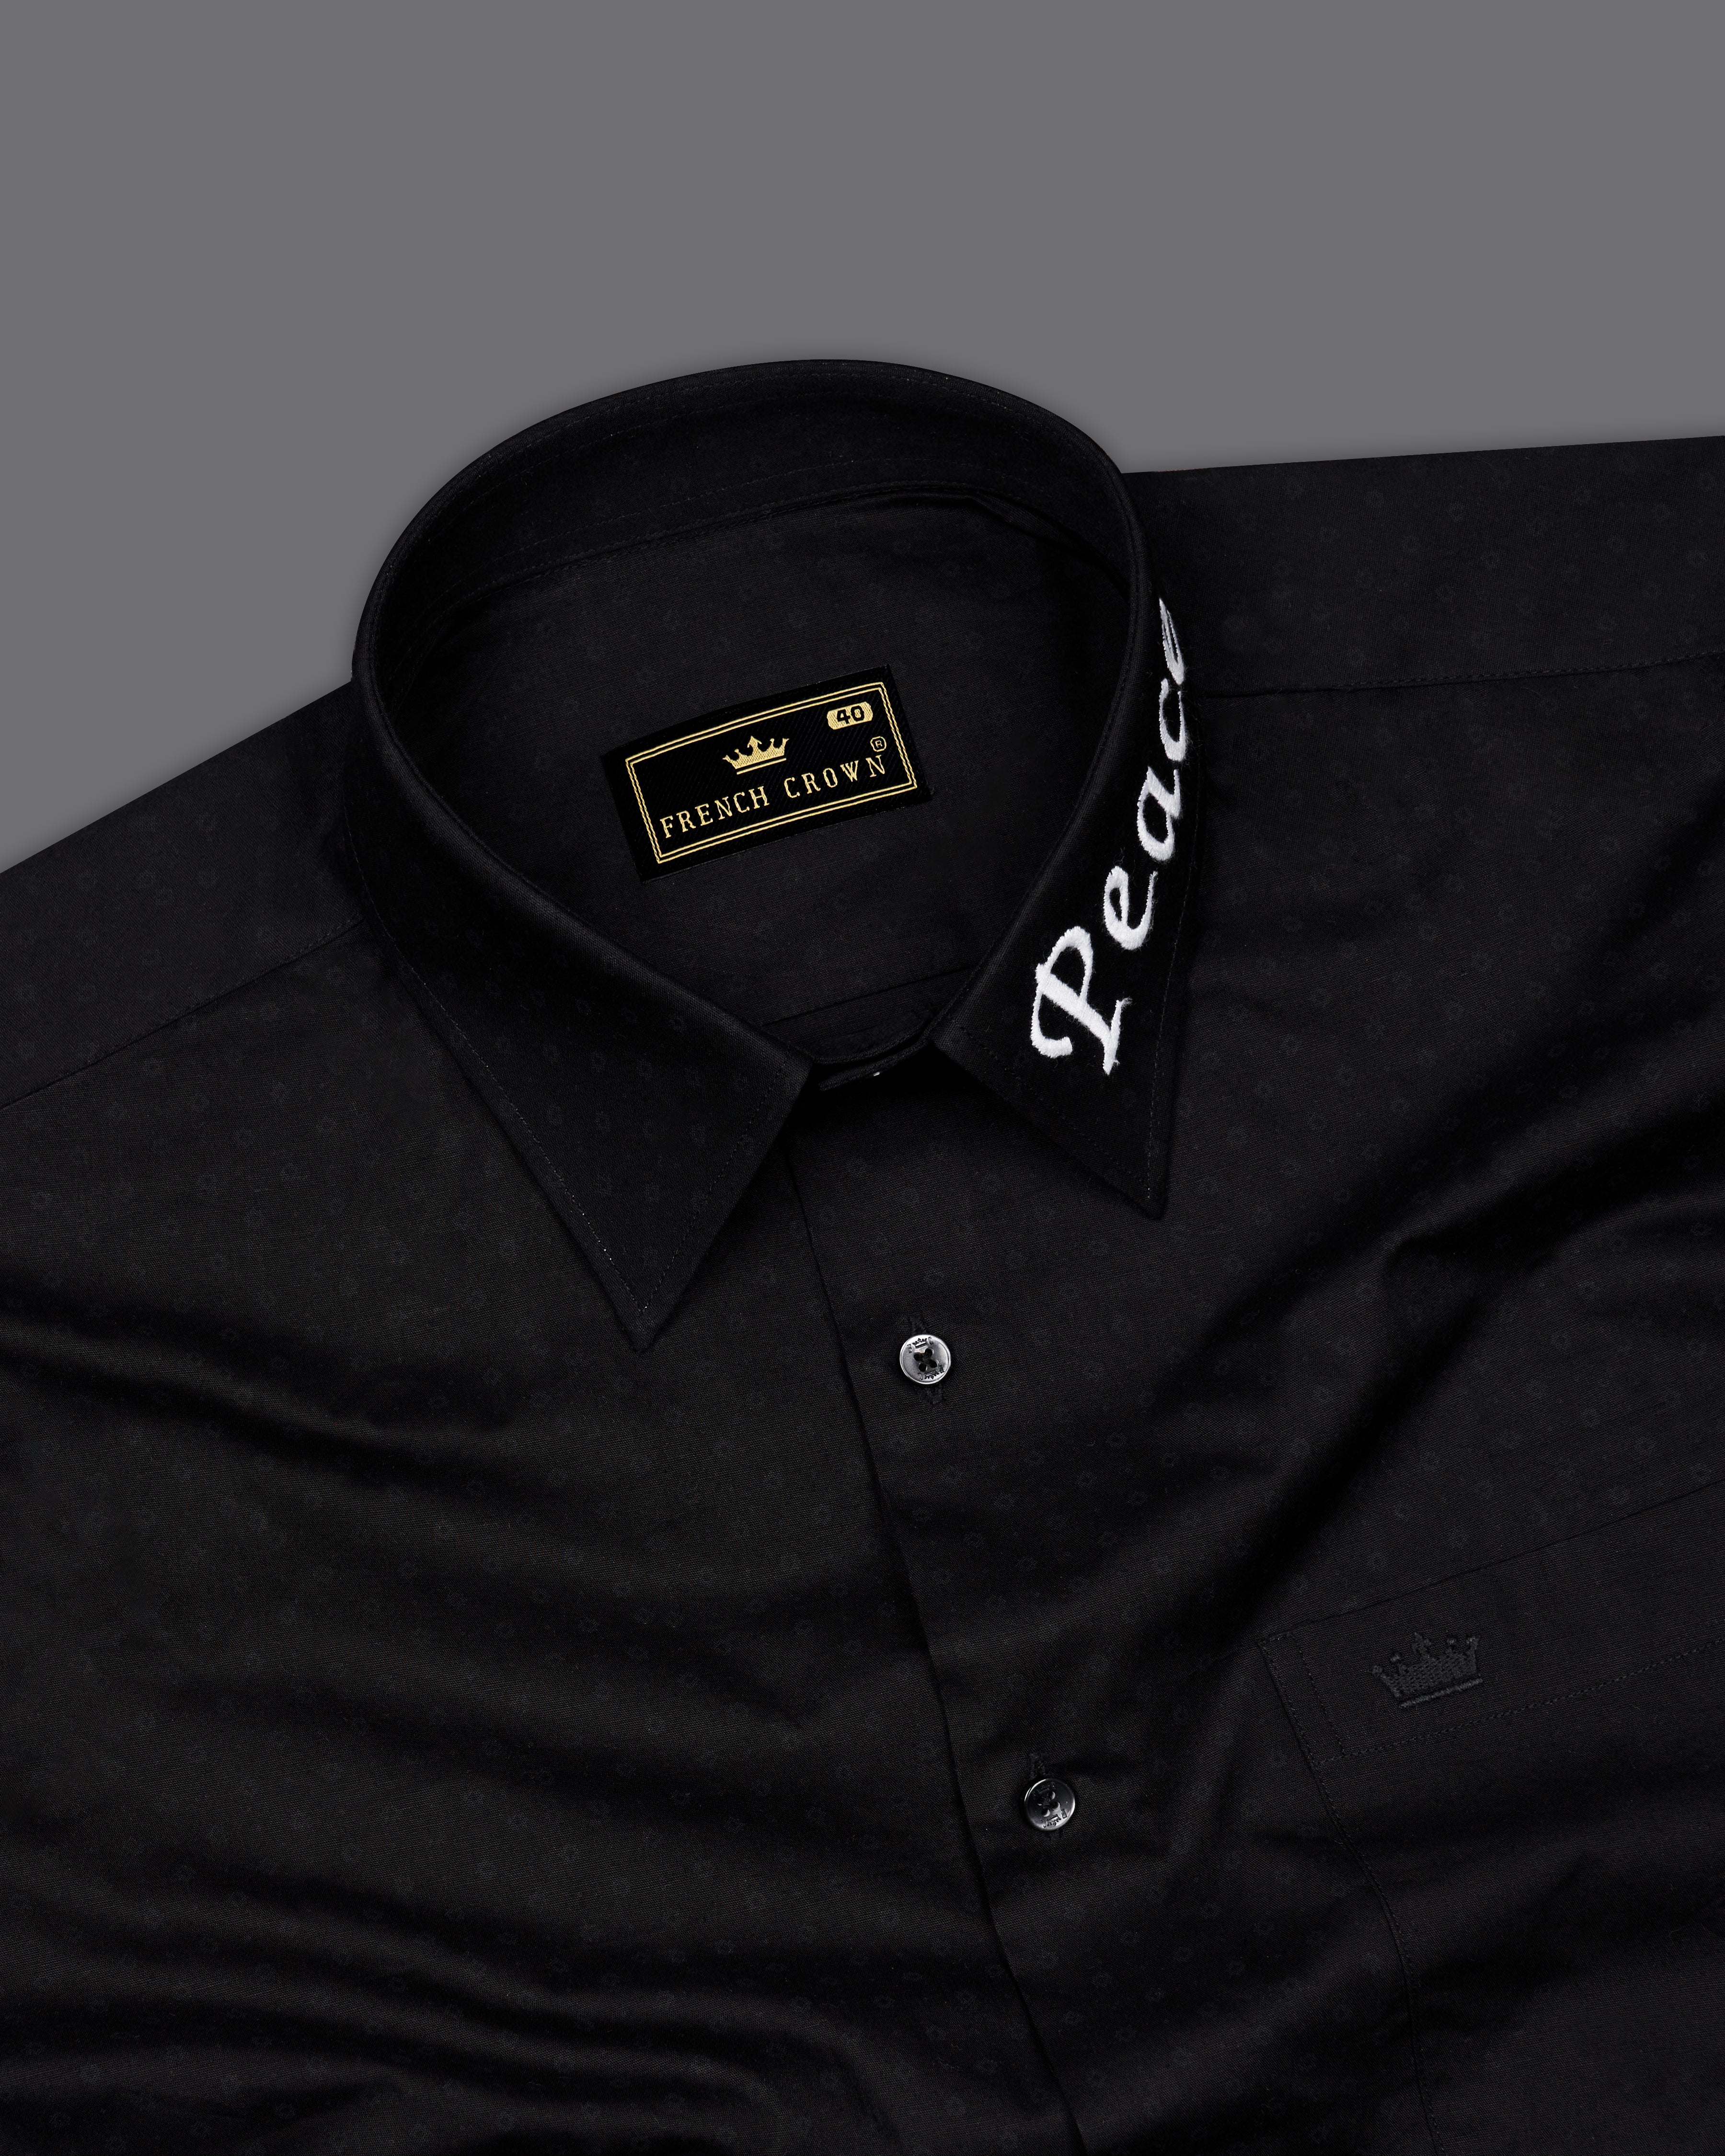 Jade Black Peace Embroidered Royal Oxford Designer Shirt 9773-BLK-P446-38, 9773-BLK-P446-H-38, 9773-BLK-P446-39, 9773-BLK-P446-H-39, 9773-BLK-P446-40, 9773-BLK-P446-H-40, 9773-BLK-P446-42, 9773-BLK-P446-H-42, 9773-BLK-P446-44, 9773-BLK-P446-H-44, 9773-BLK-P446-46, 9773-BLK-P446-H-46, 9773-BLK-P446-48, 9773-BLK-P446-H-48, 9773-BLK-P446-50, 9773-BLK-P446-H-50, 9773-BLK-P446-52, 9773-BLK-P446-H-52